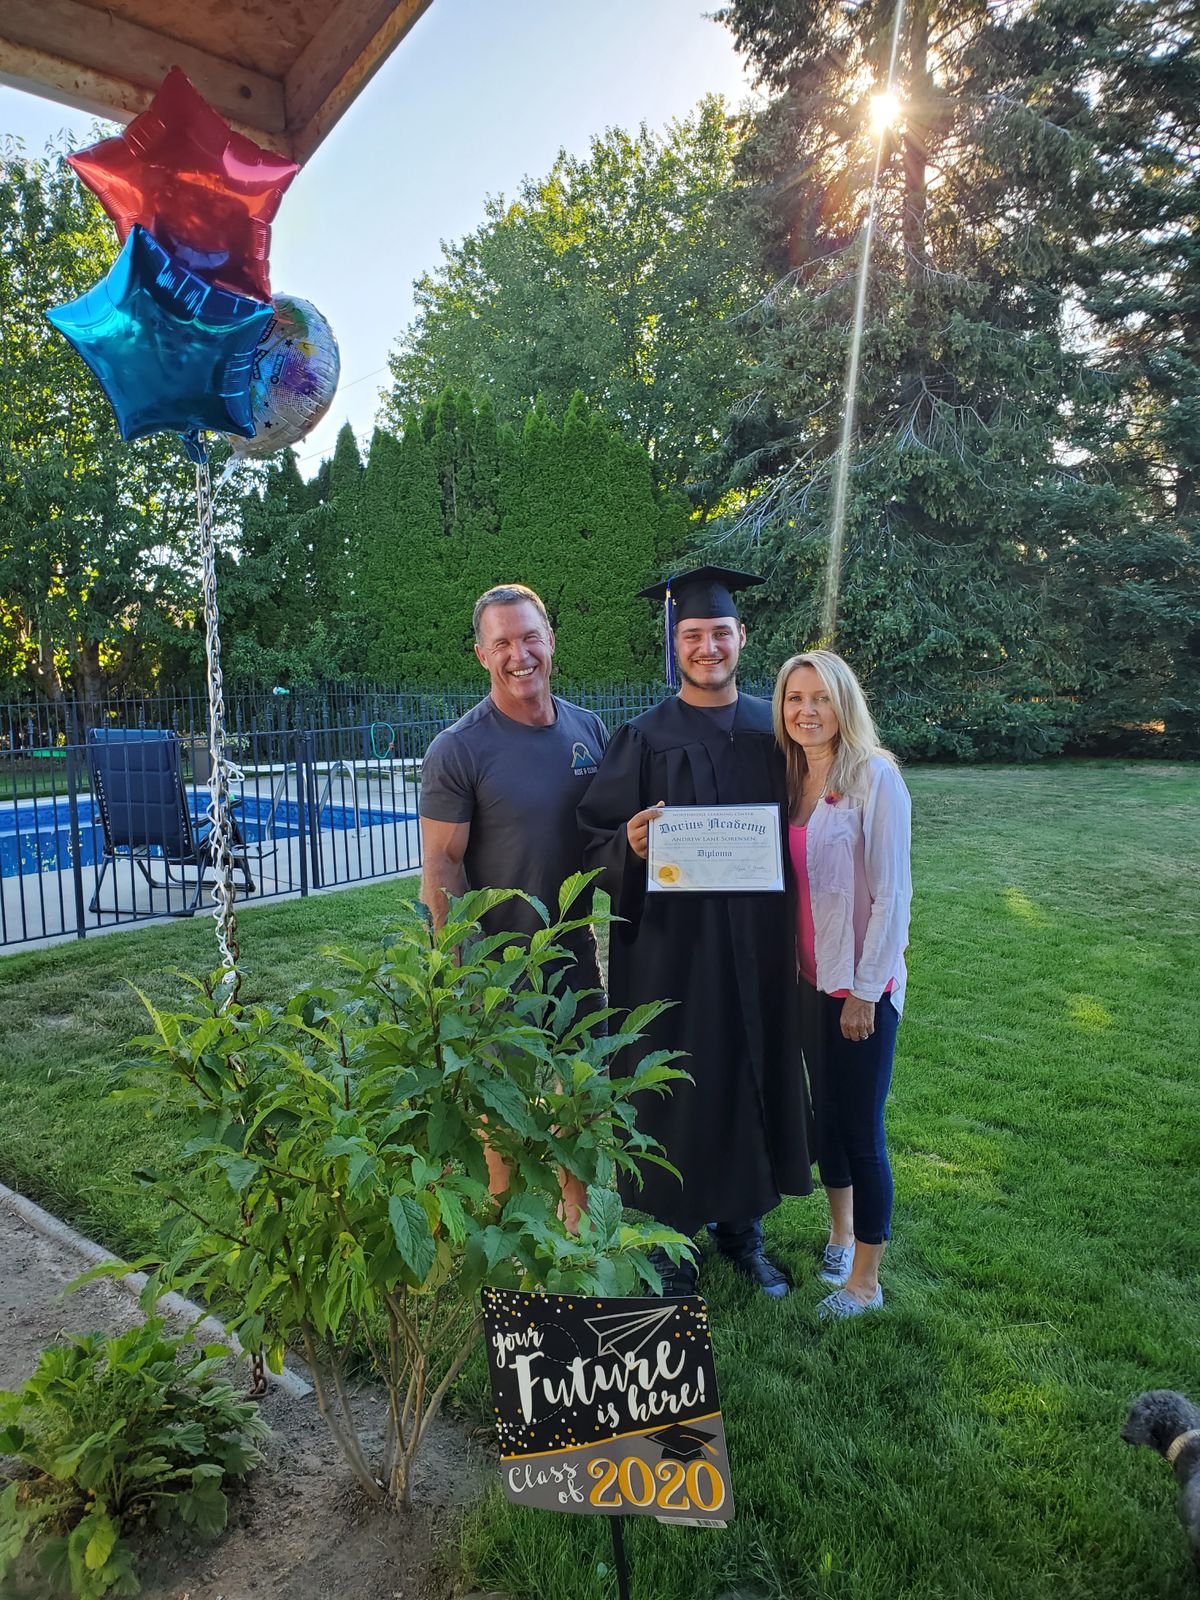 Andrew Sorensen, center, along with his parents, Randy and Theresa Sorensen, celebrate his high school graduation in June 2020.  (Courtesy of the Sorensen family)